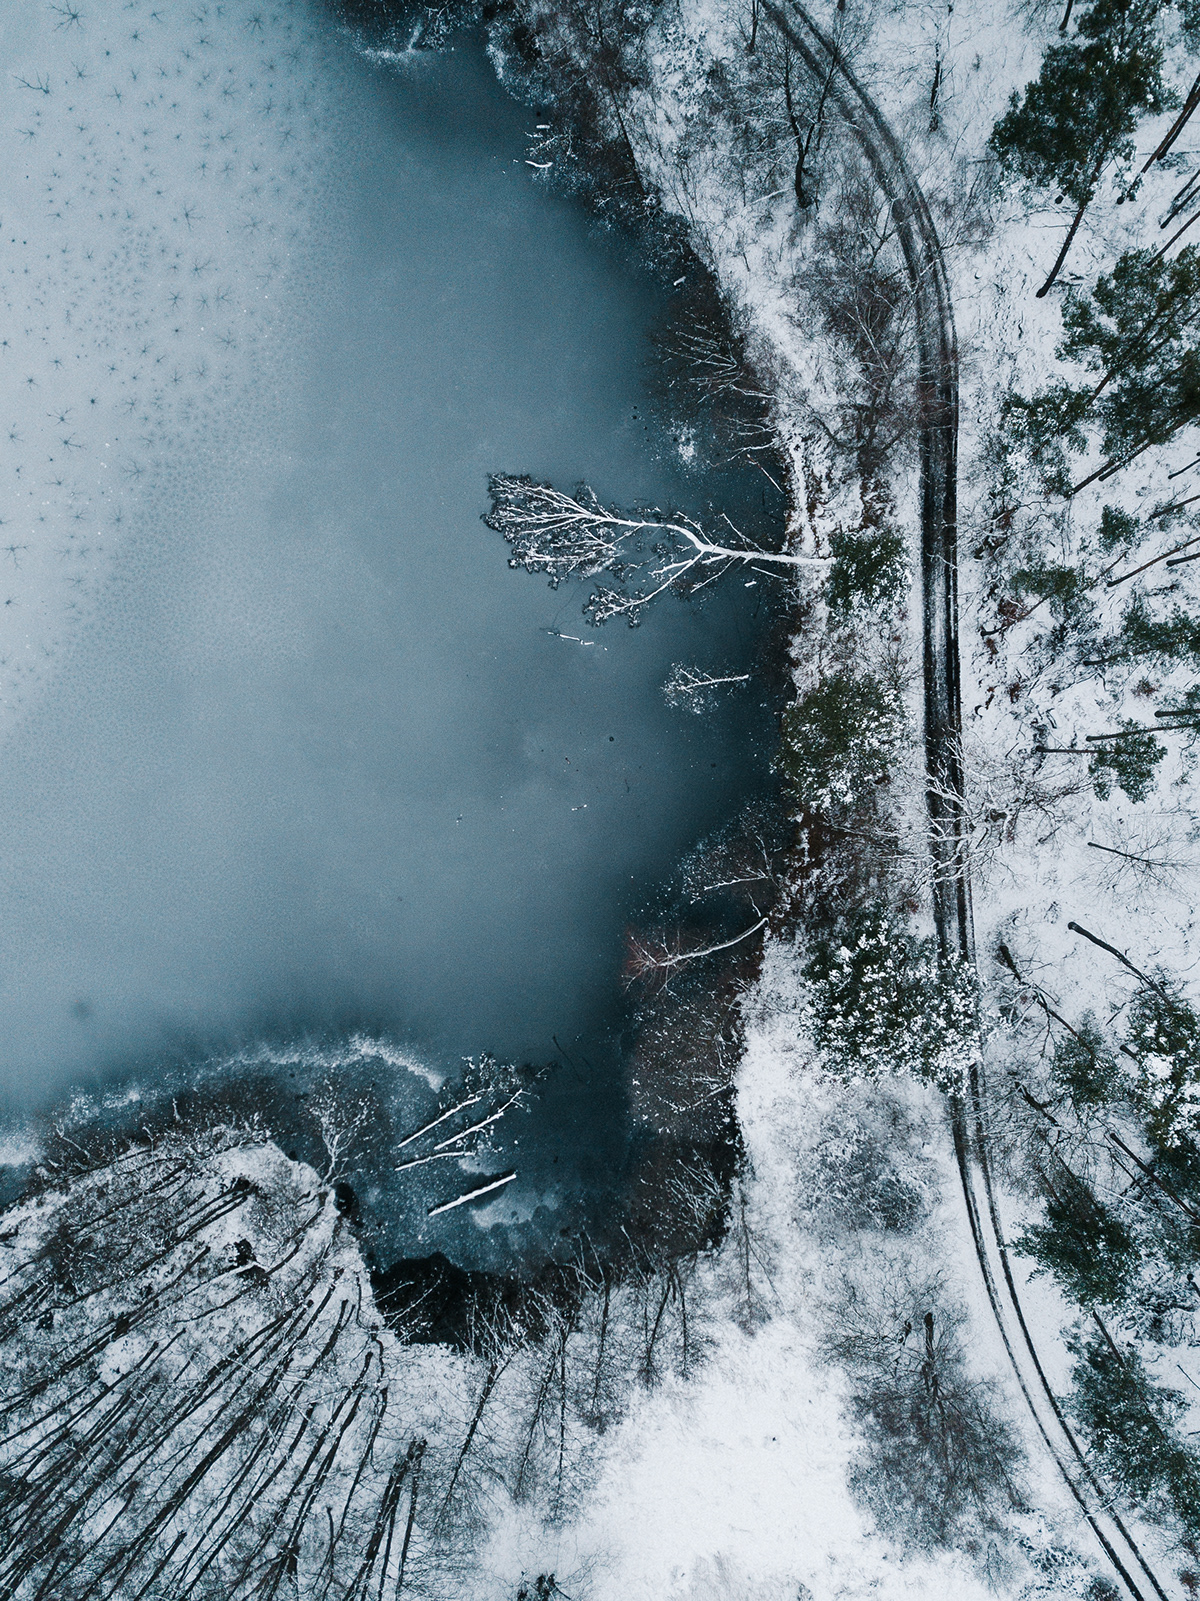 frozen lake from above withe a lying tree trunk in winter